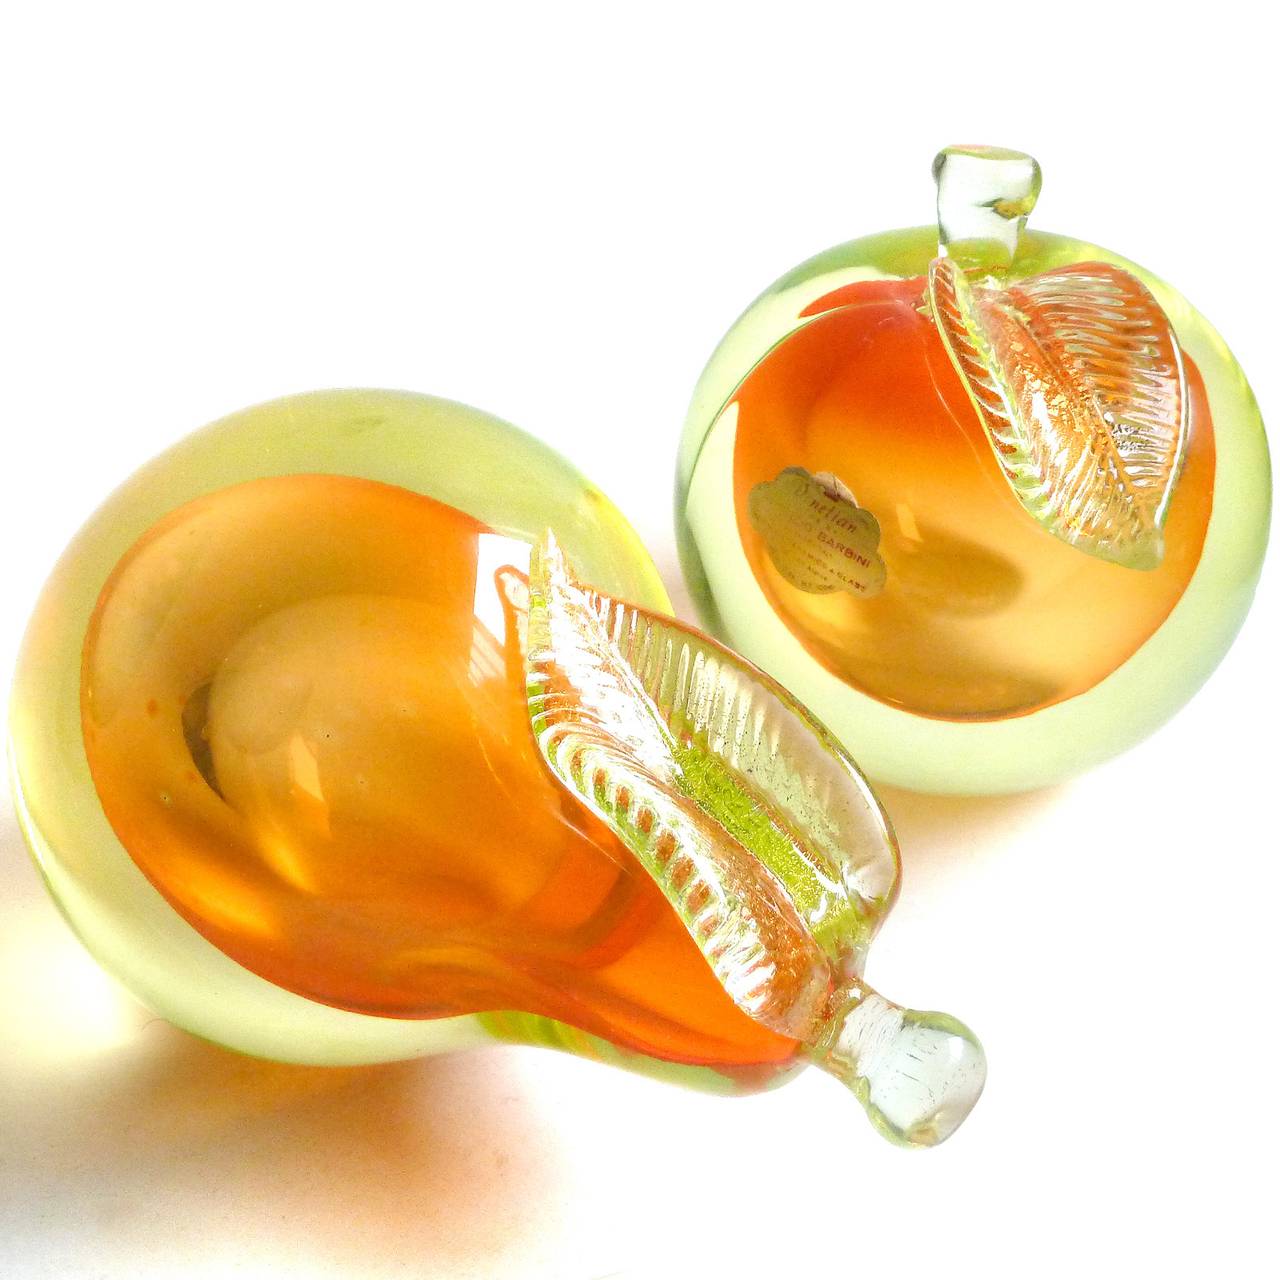 FREE Shipping Worldwide! See details below description.

Beautiful Murano Hand Blown Sommerso Vaseline Yellow, Orange and Gold Flecks Art Glass Pear and Apple Fruit Bookends. Documented to designer Alfredo Barbini, circa 1950-60s and published in